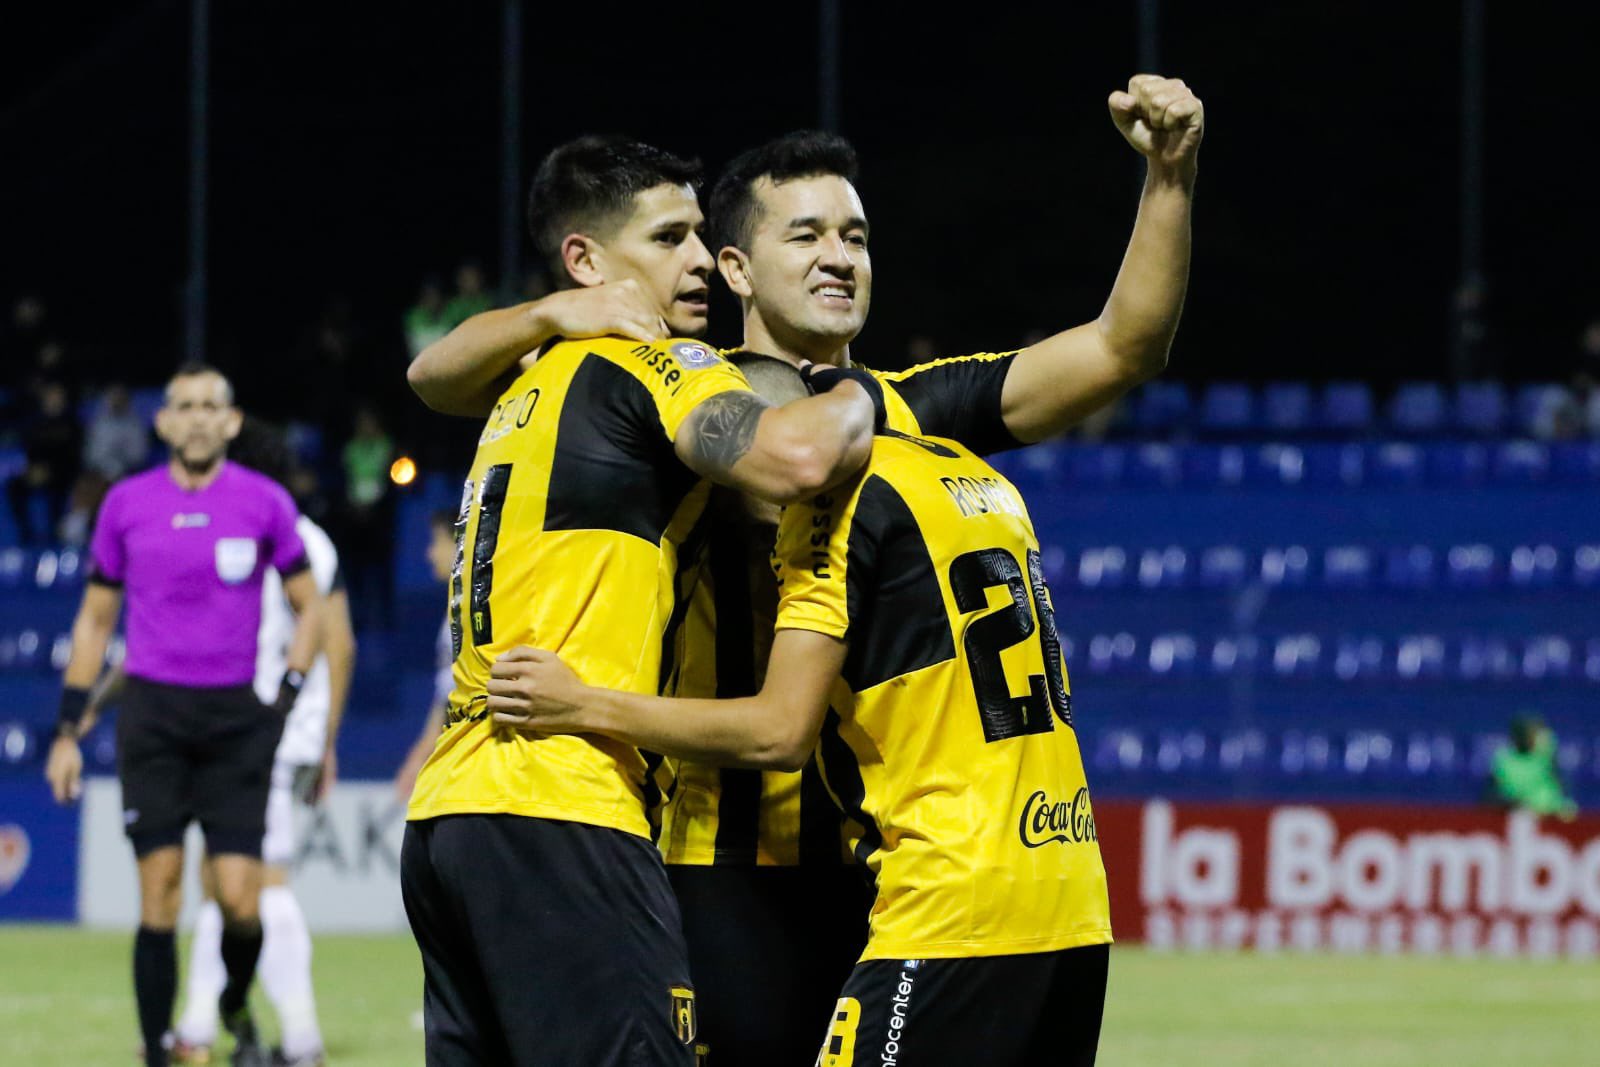 Guaraní returns to victory and leaves "Tacua" in the background